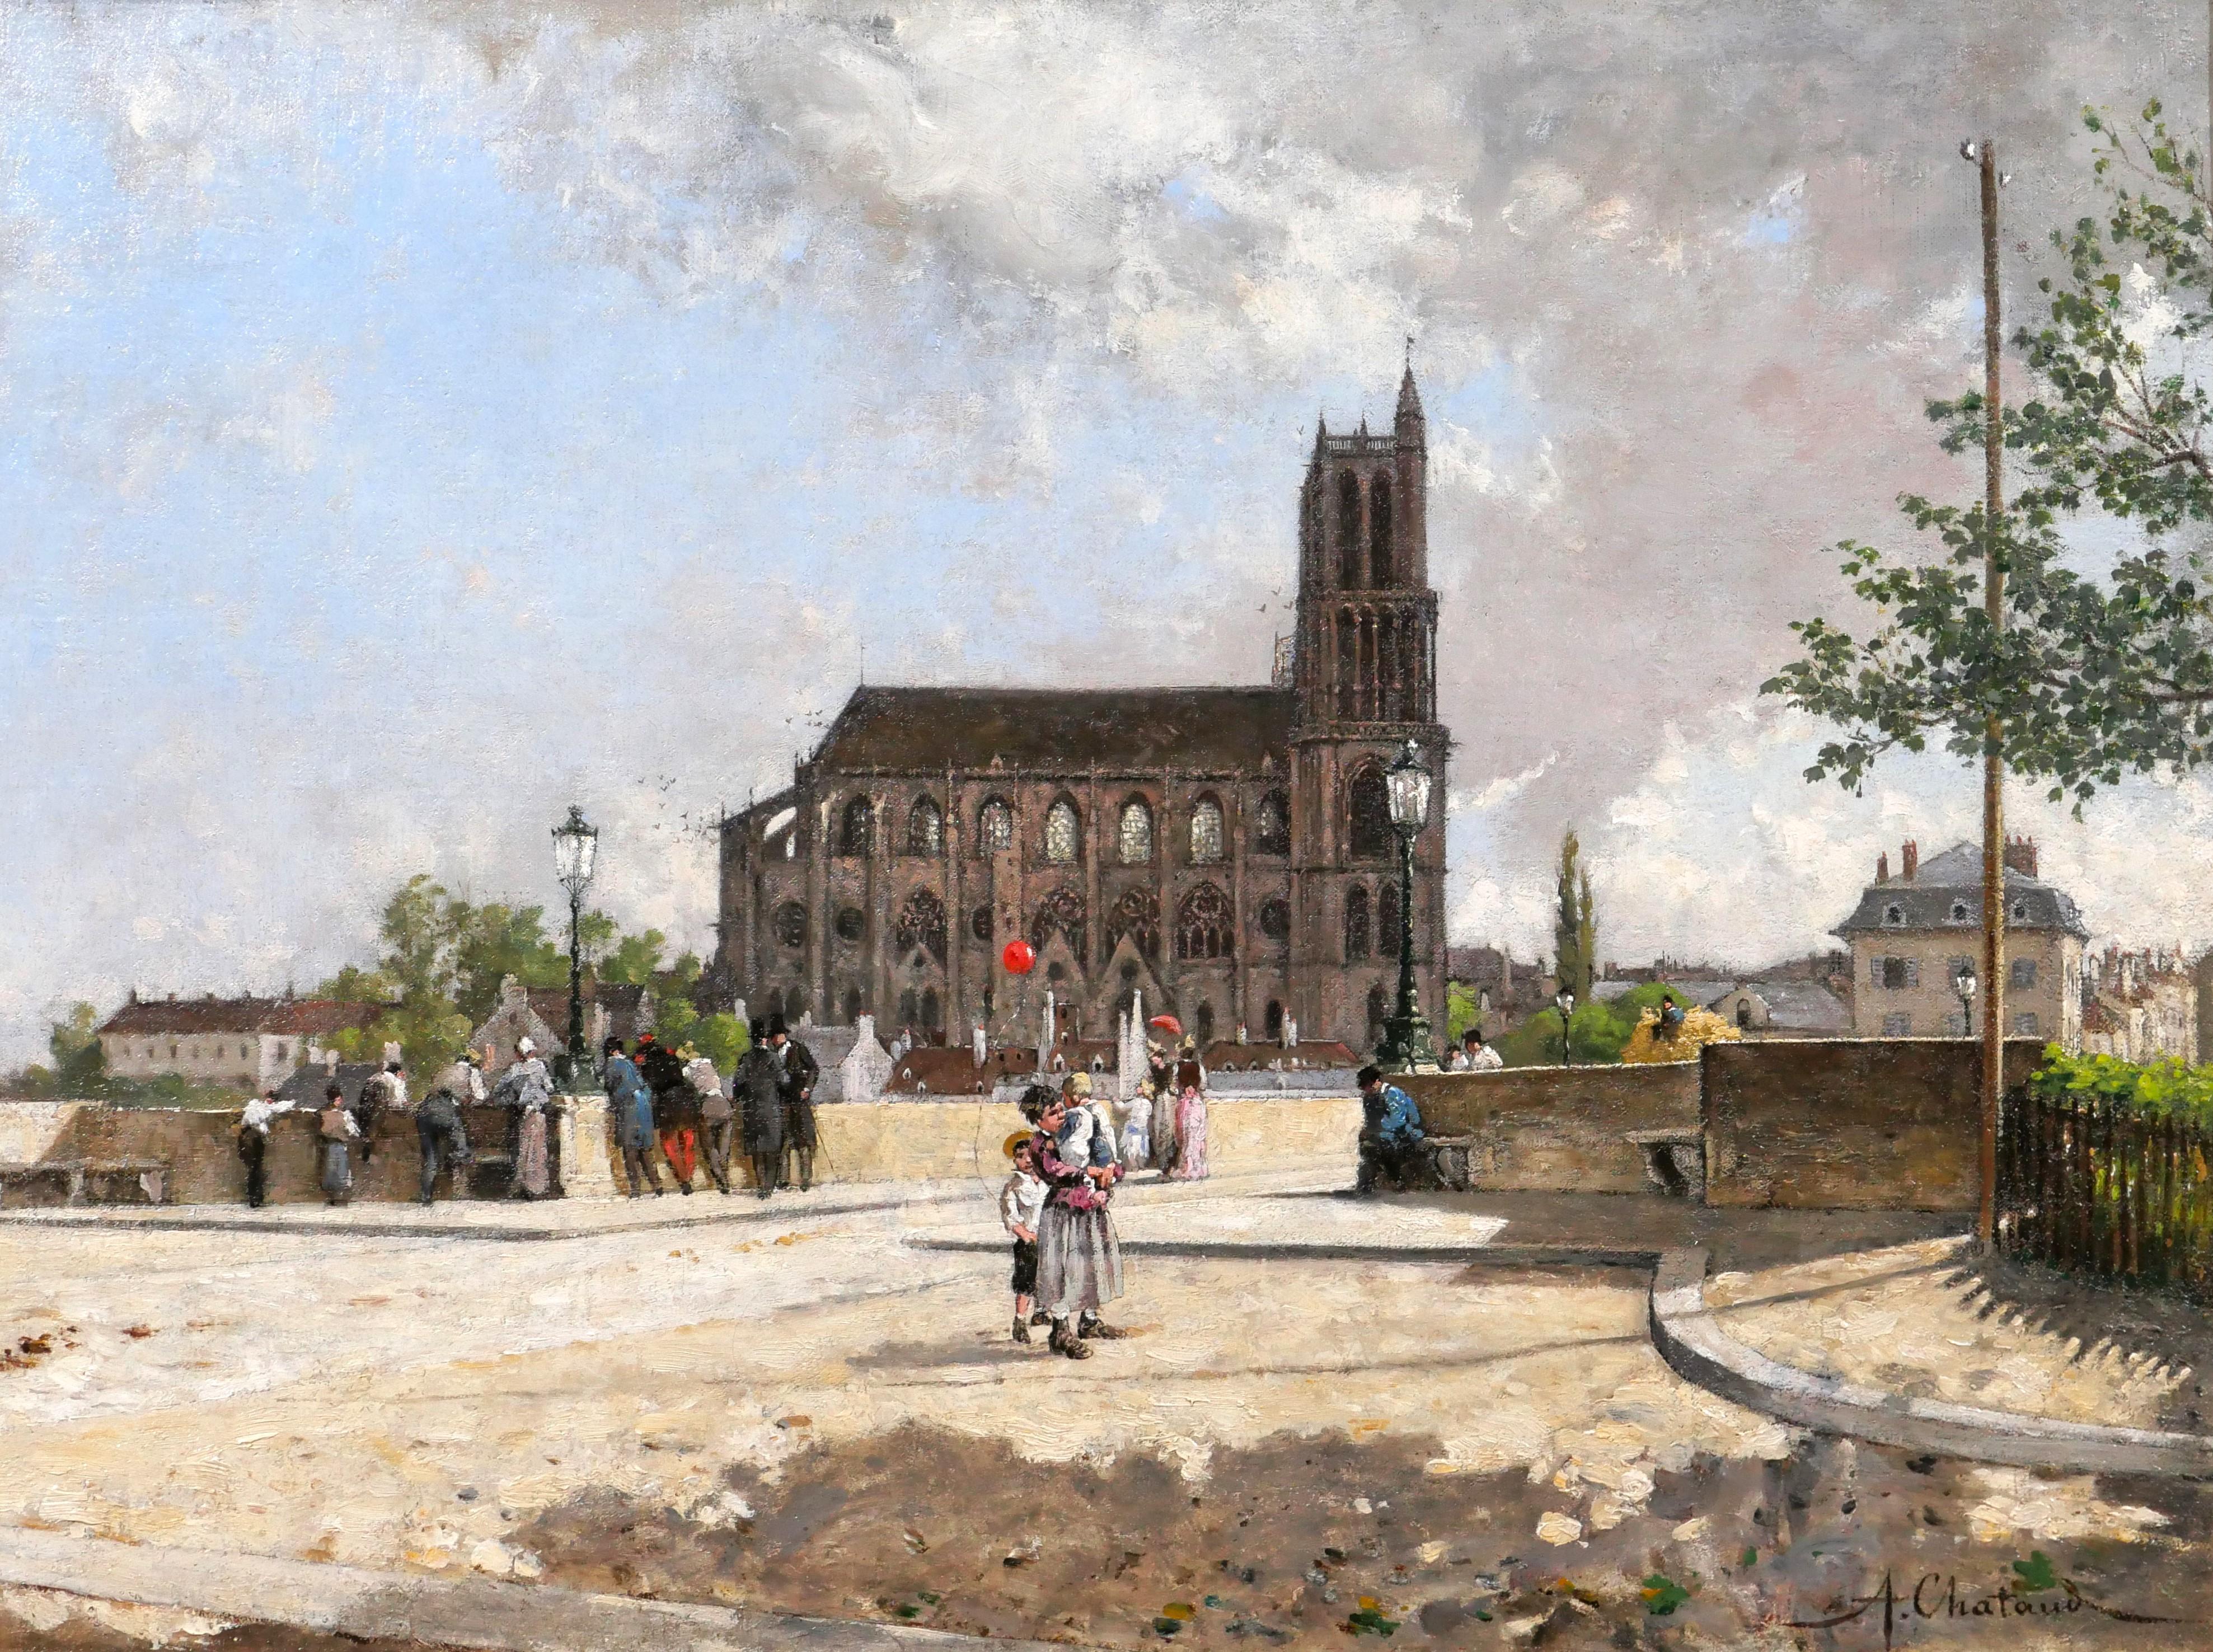 The red ball, landscape with the cathedral of Mantes-la-Jolie (France) - Painting by Alfred Chataud